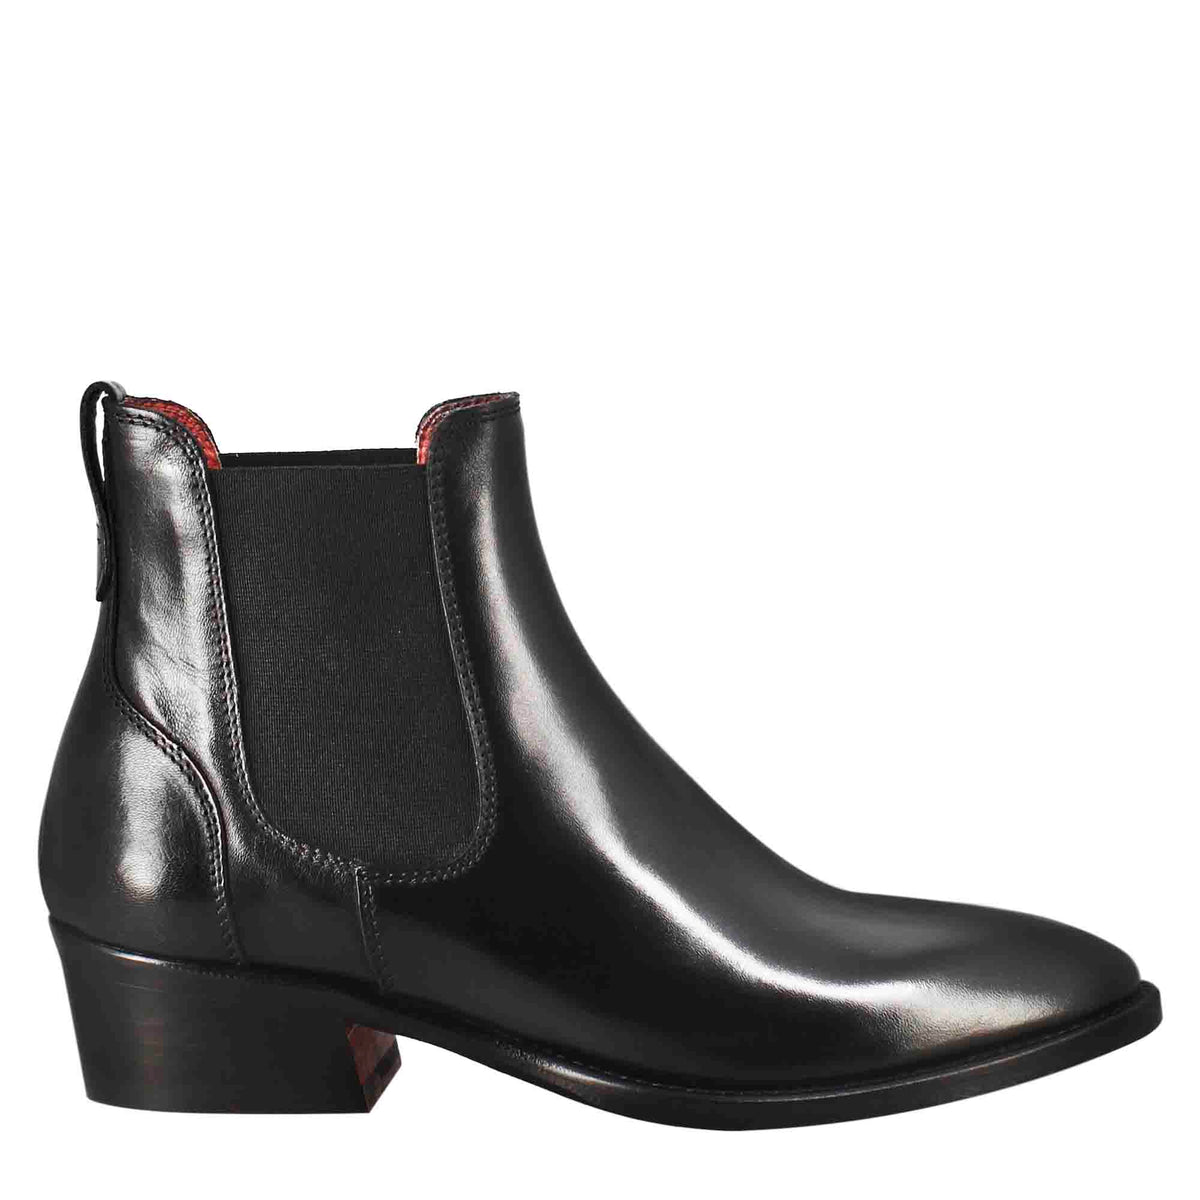 Women's smooth Chelsea boot with medium heel in black leather